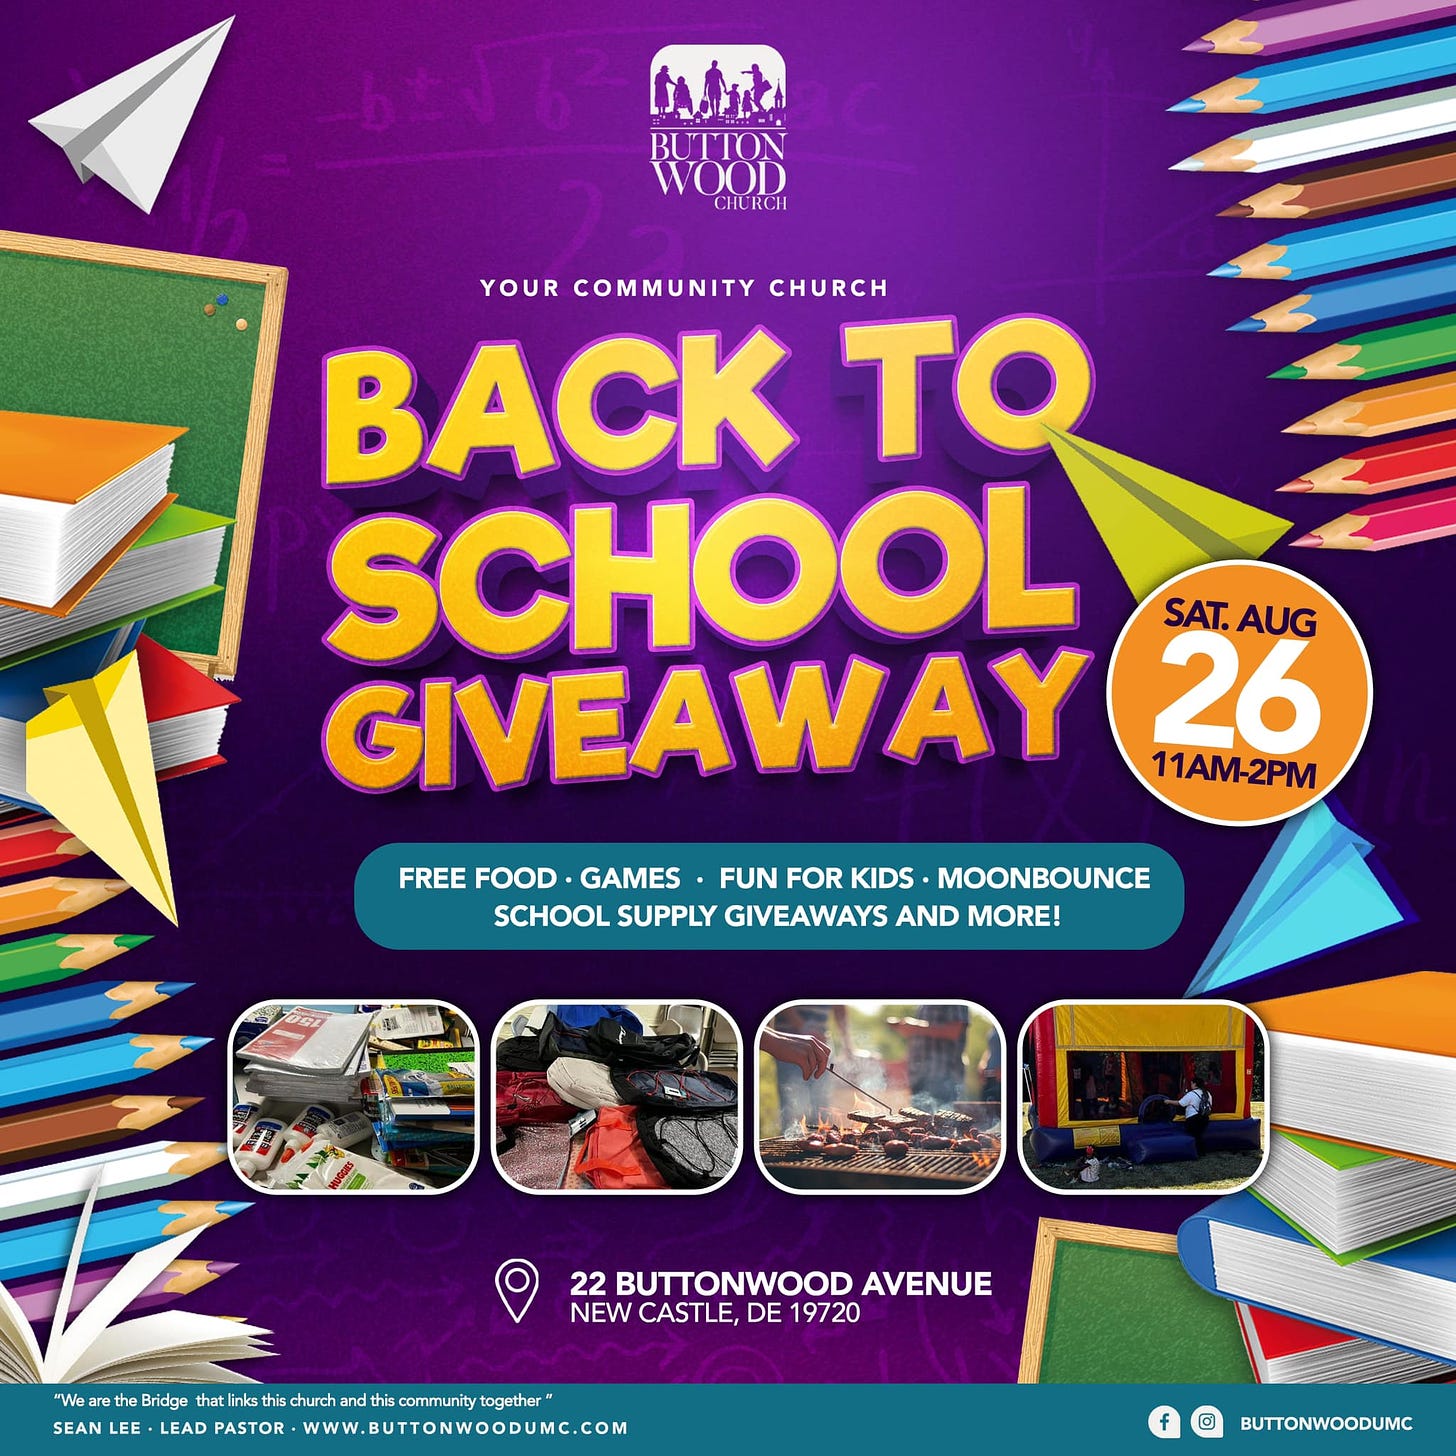 May be an image of text that says 'ልሰ BOOD WooD YOUR COMMUNITY CHURCH BACK TQ SCHOOL SAT. AUG GIVEAWAY 26 11AM-2PM FREE FOOD GAMES FUN FOR KIDS MOONBOUNCE SCHOOL SUPPLY GIVEAWAYS AND MORE! 22 BUTTONWOOD AVENUE NEW CASTLE, DE 19720 Bridge SEAN LEE LEAD PASTOR WWW.BUTTONWOODUMC.COM BUTTONWOODUMC'